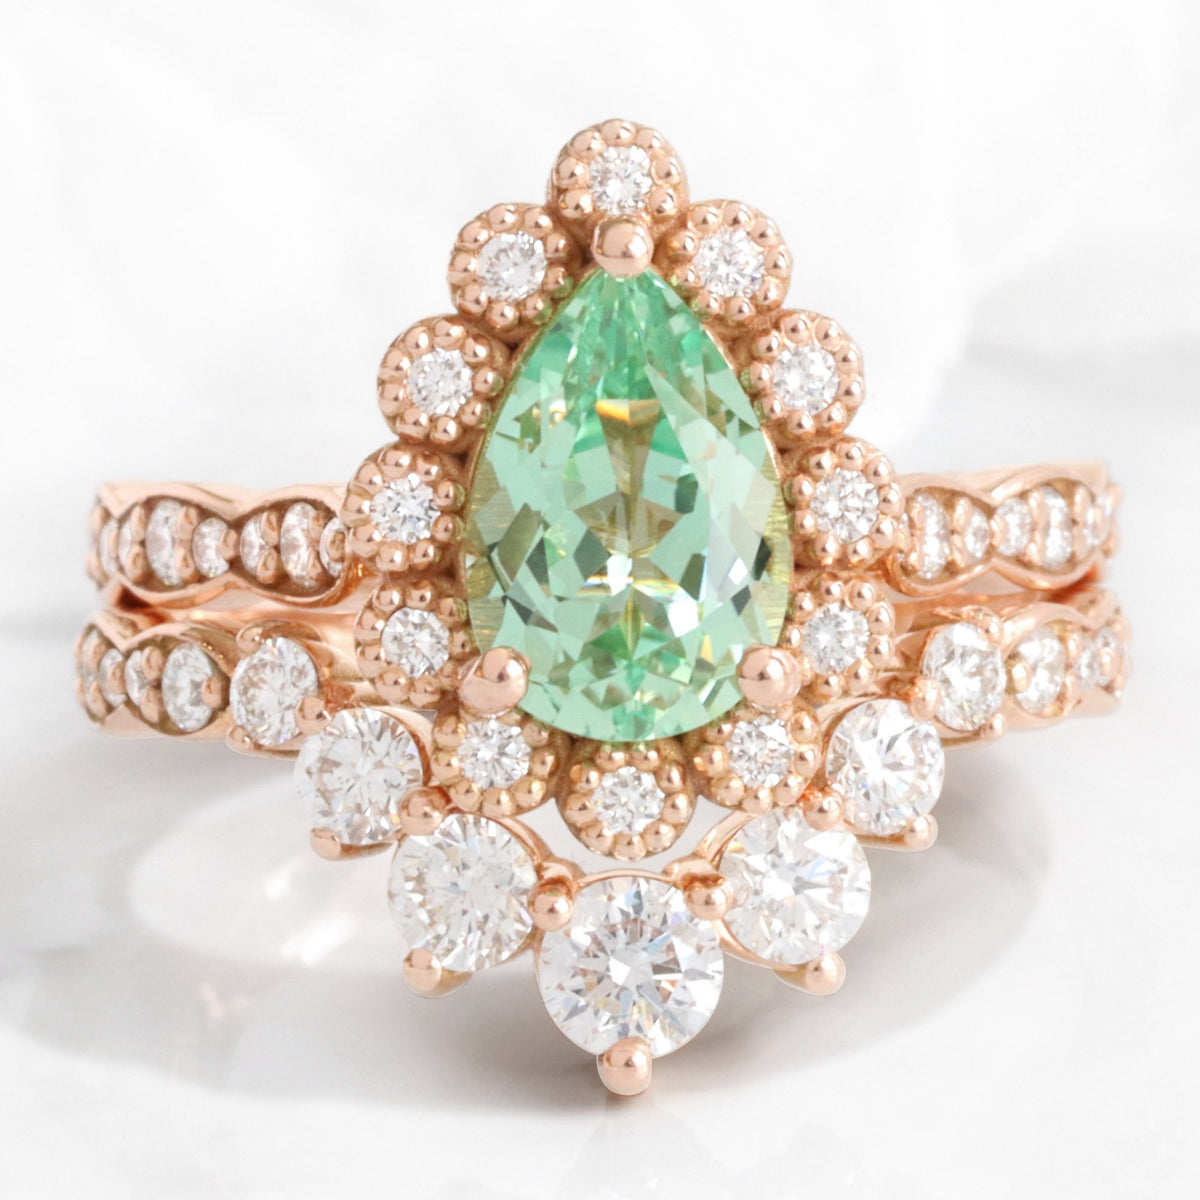 Vintage style pear green sapphire ring bridal set rose gold curved diamond wedding ring stack la more design jewelry